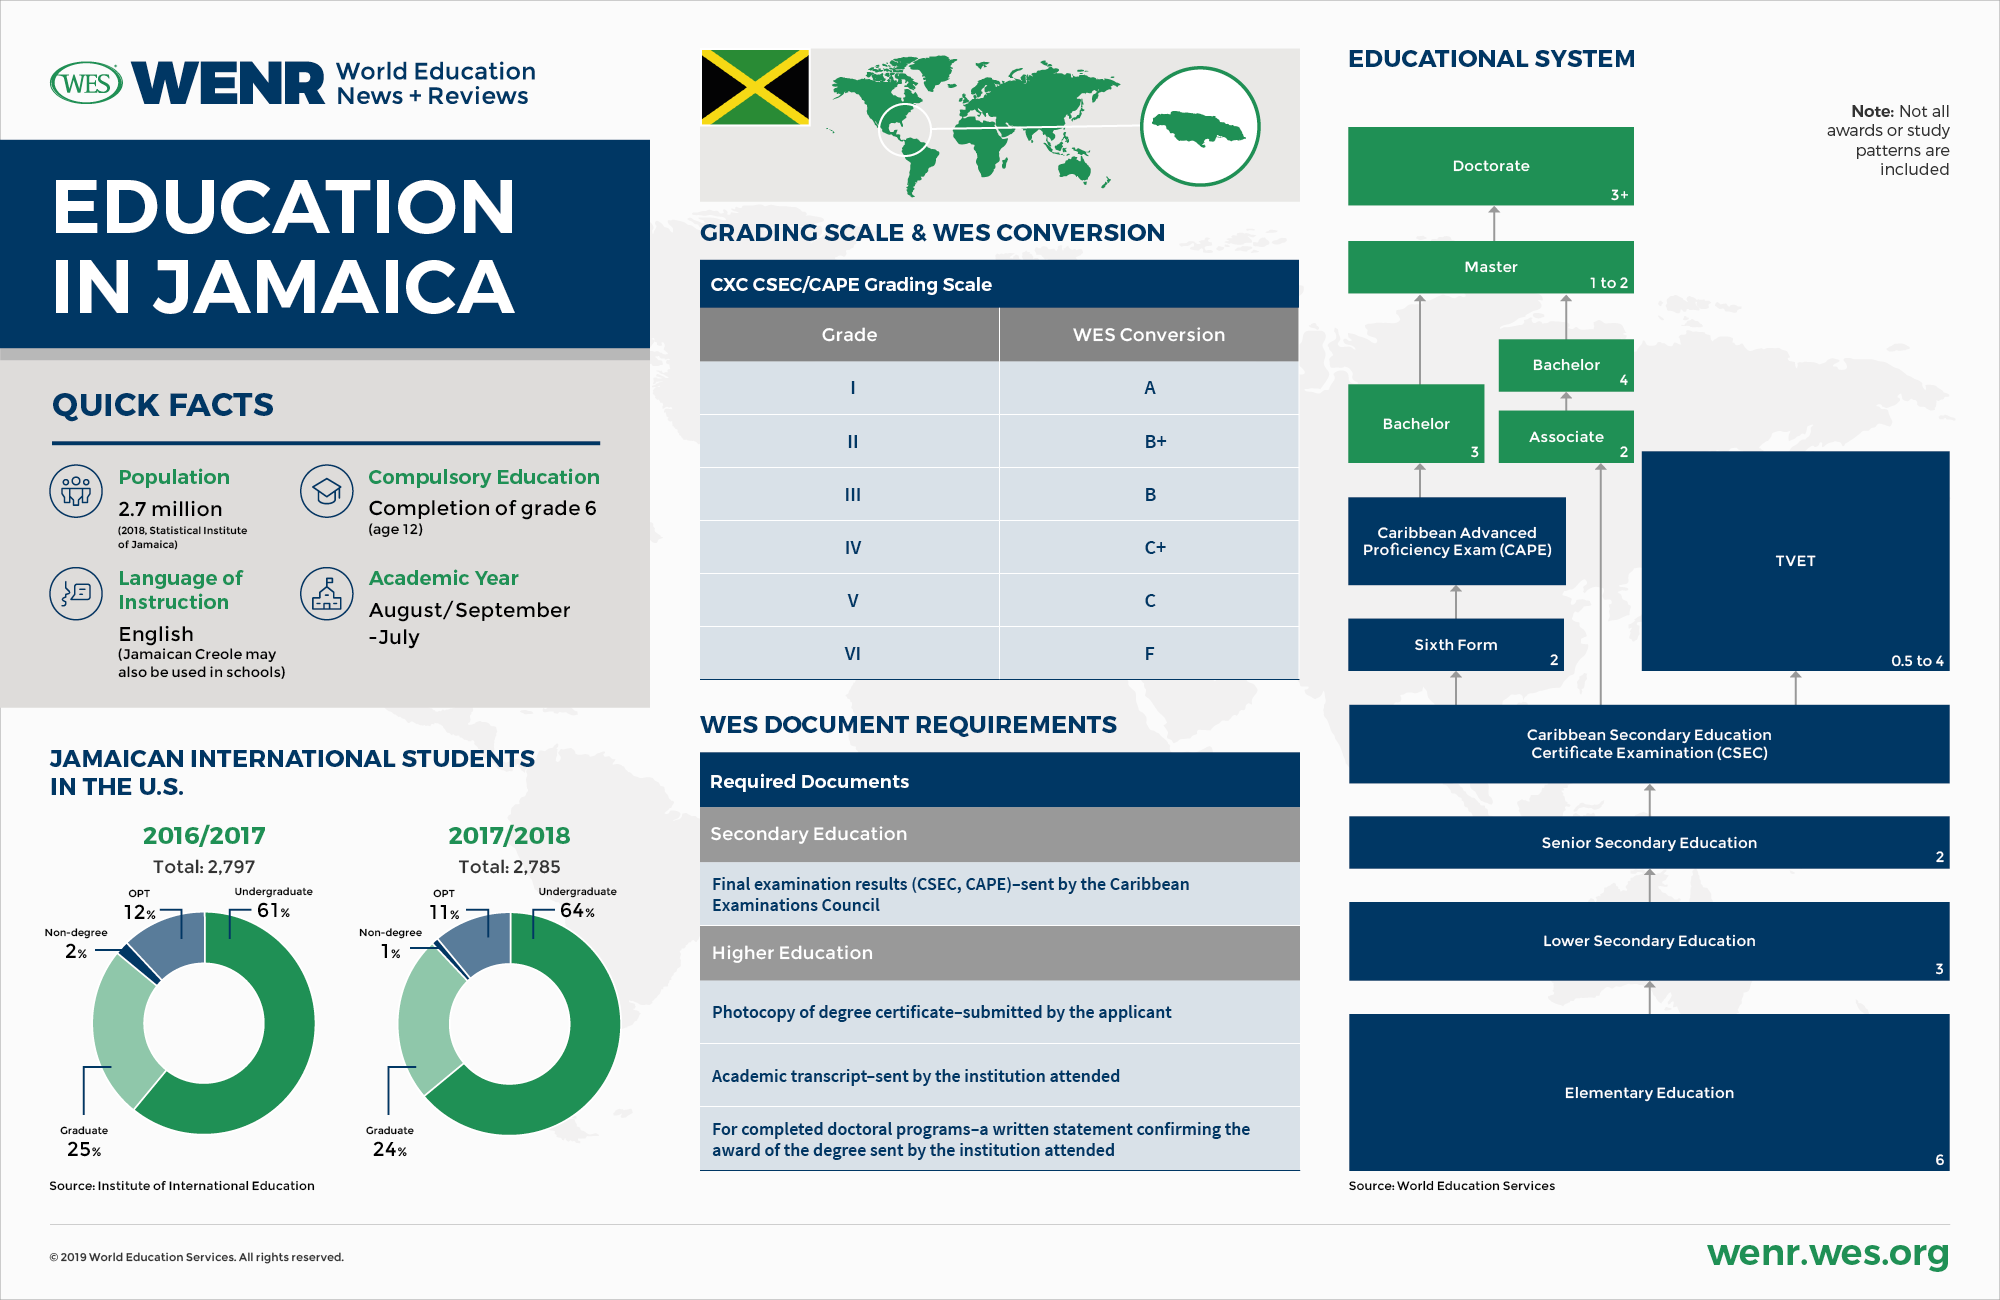 An infographic with fast facts on Jamaica's educational system and international student mobility 